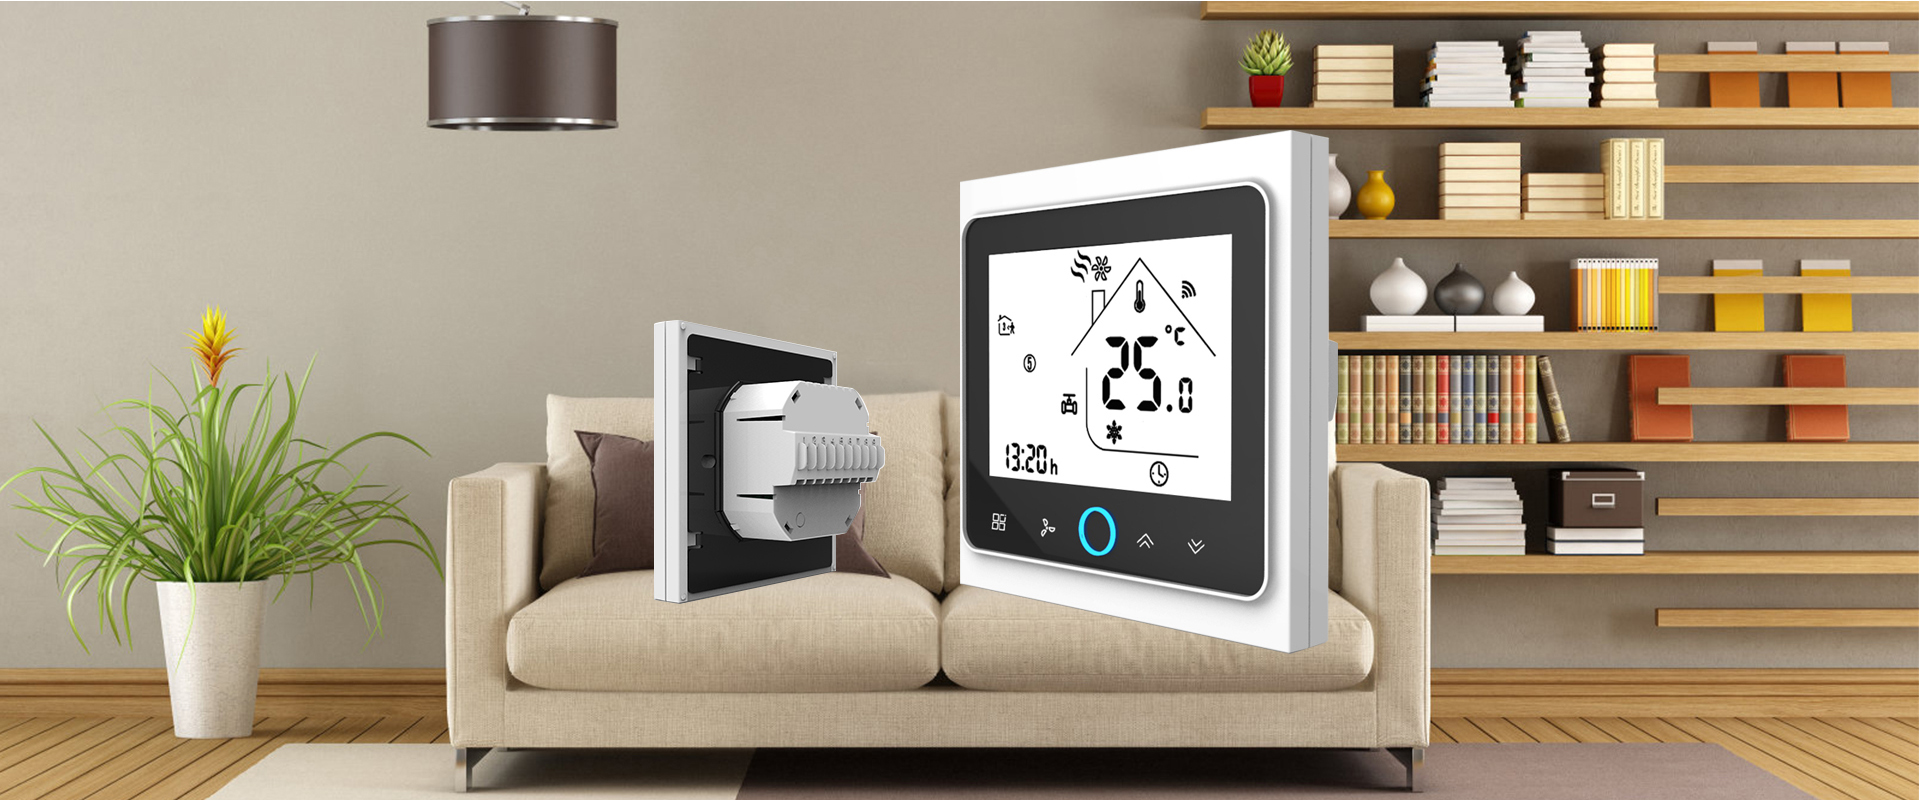 BECA BAC-002 Two Pipe Four Pipe Keycard Fan Coil Programmable Room Thermostat-Xiamen Beca Energysaving Technology